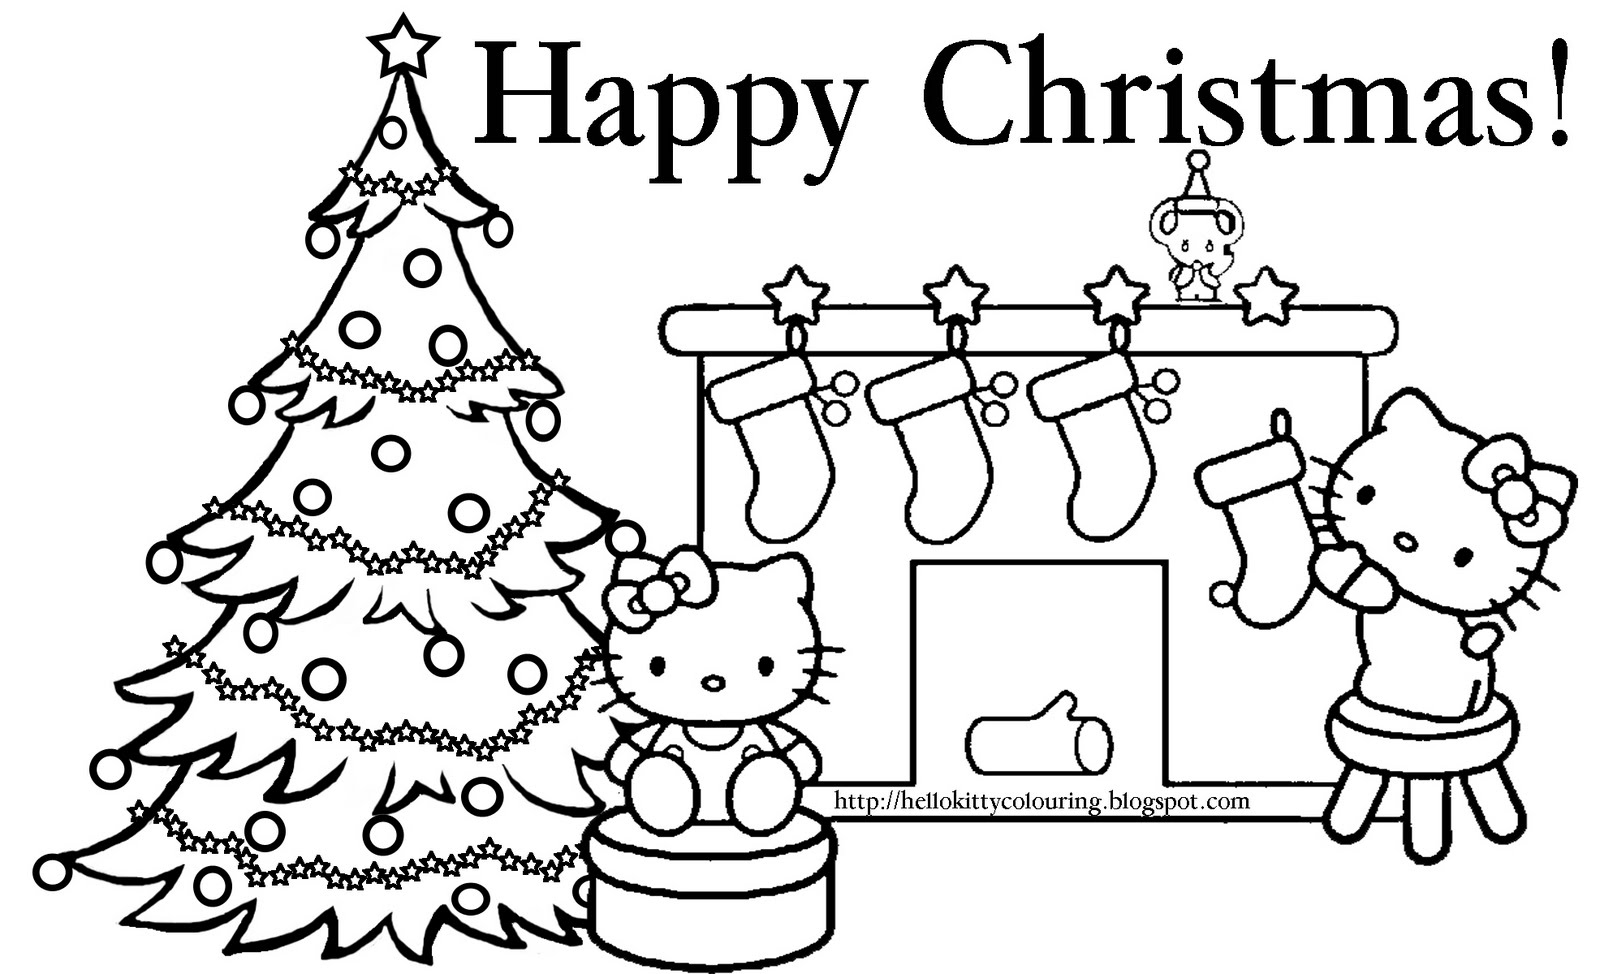 HAPPY CHRISTMAS COLORING PAGE HELLO KITTY